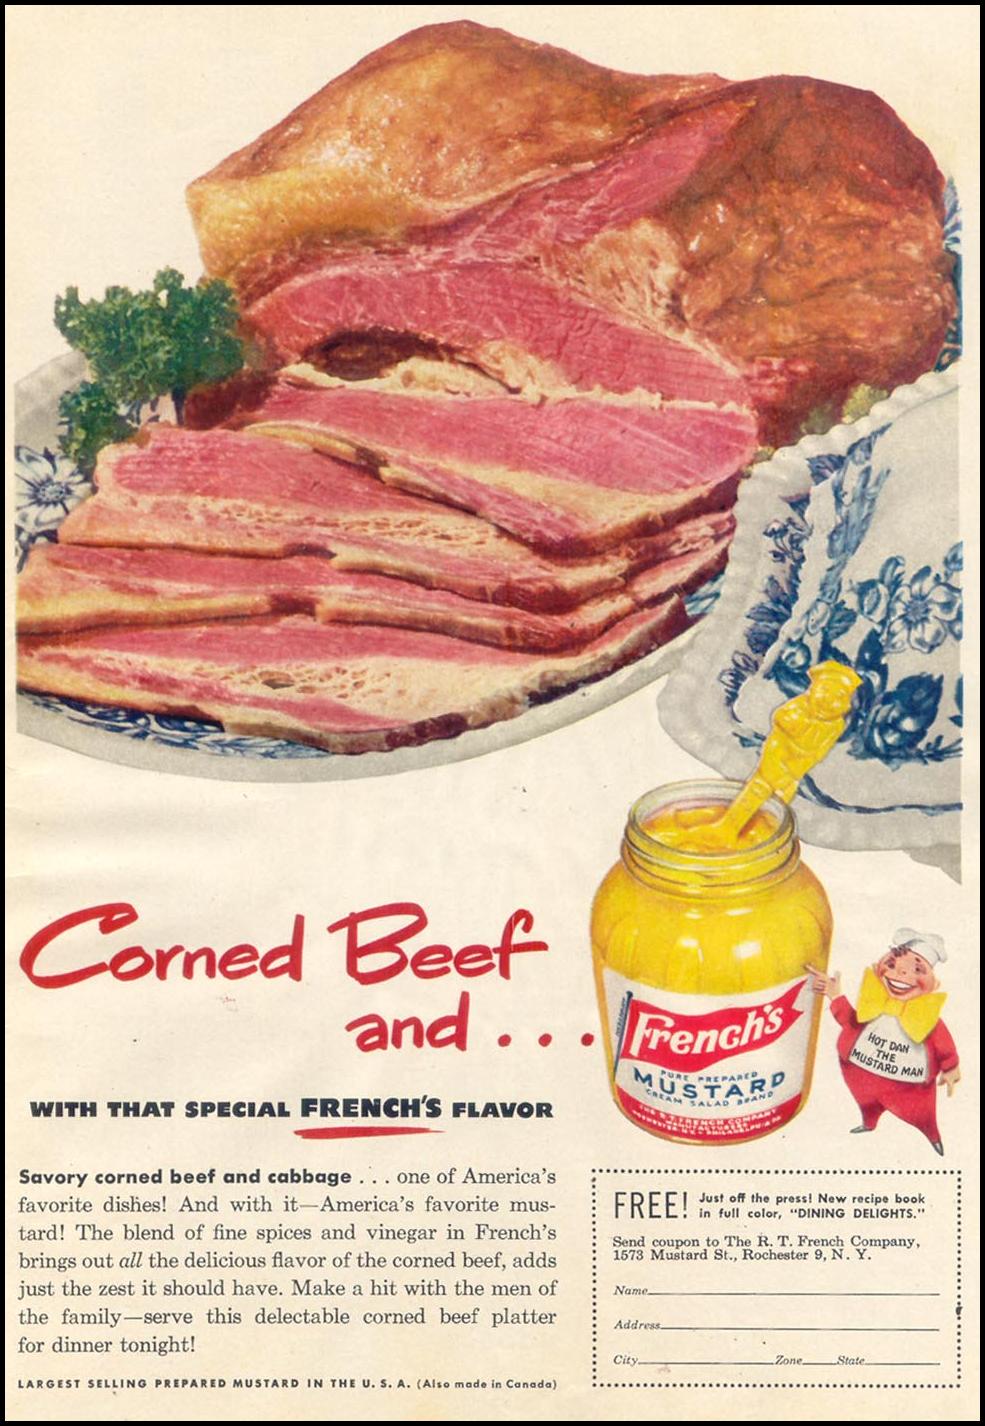 FRENCH'S PREPARED MUSTARD
WOMAN'S DAY
02/01/1950
p. 21